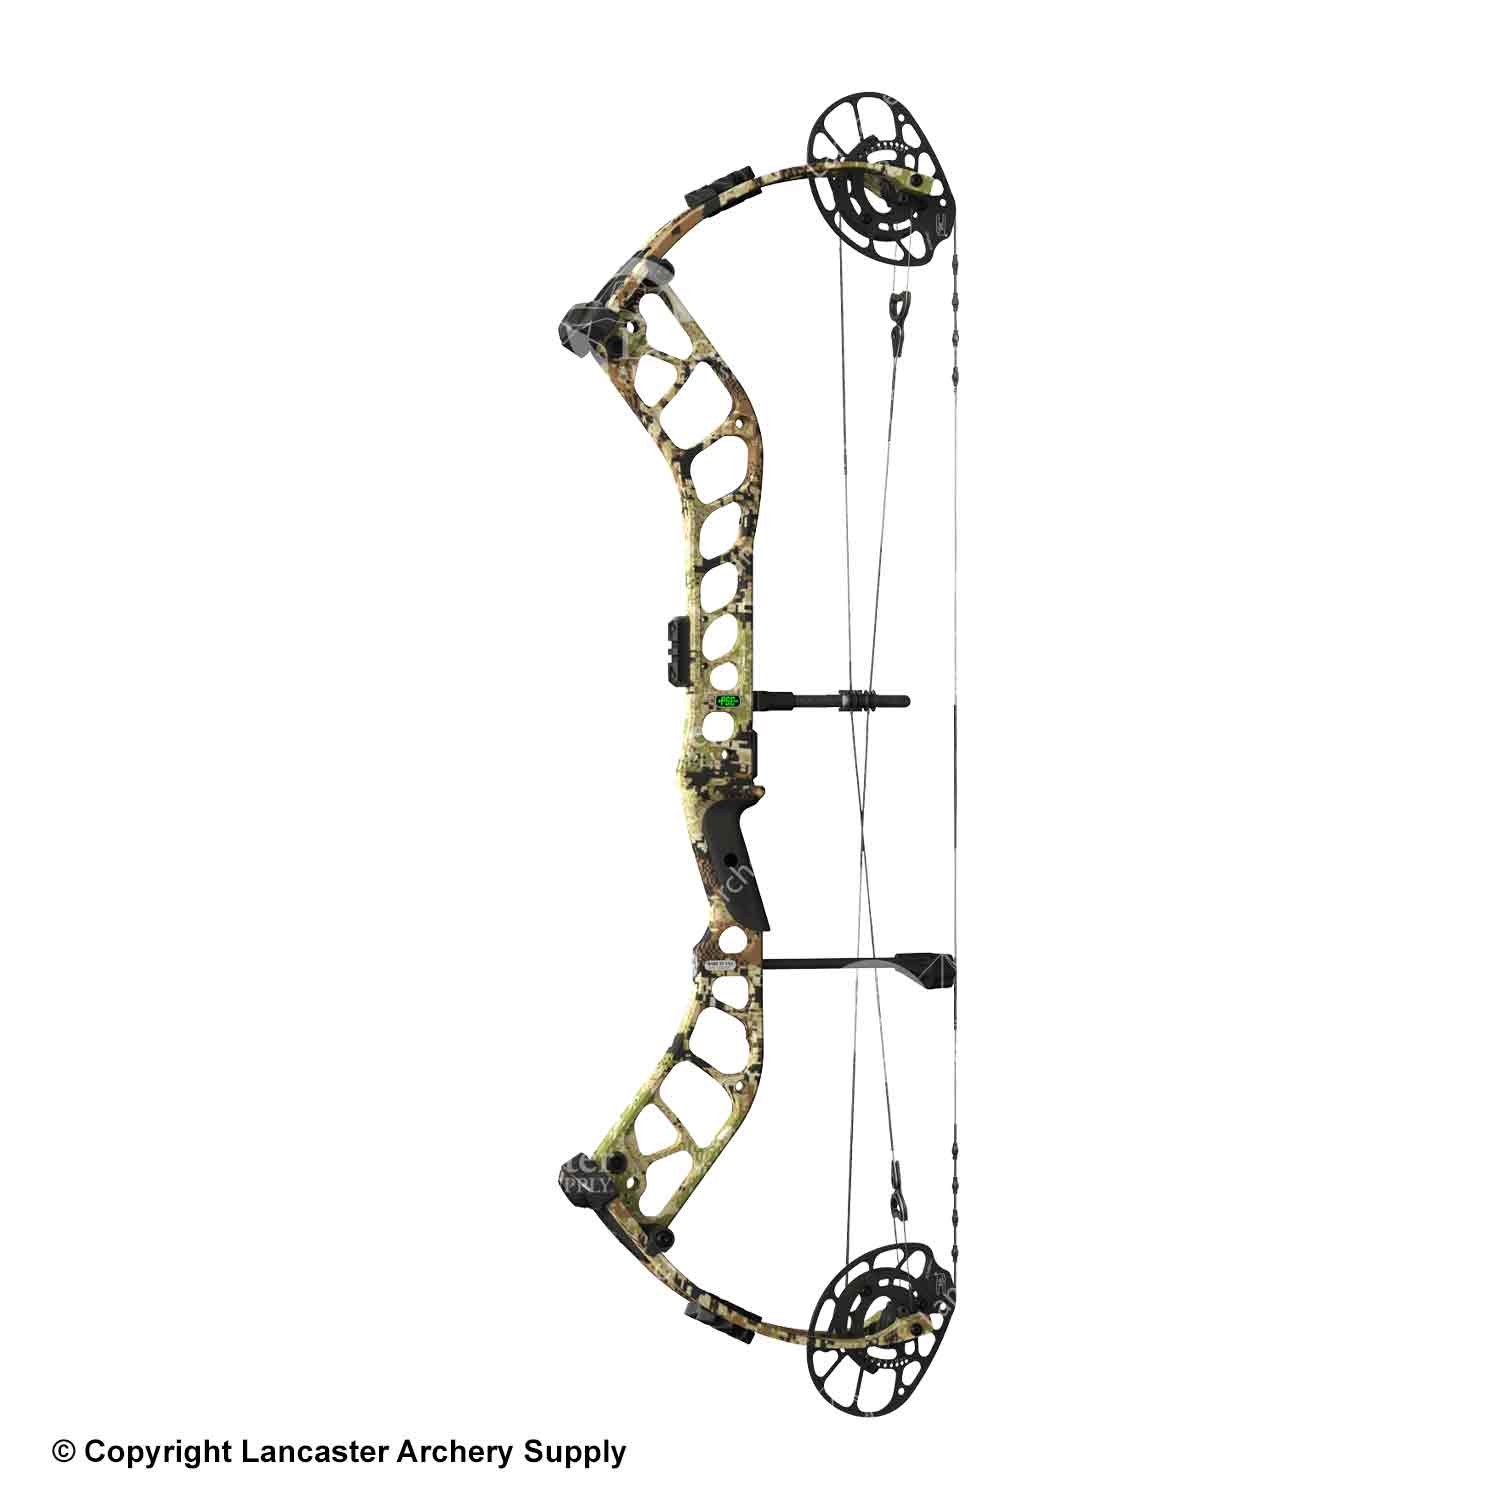 PSE Nock On Unite Compound Hunting Bow (S2 Cam)